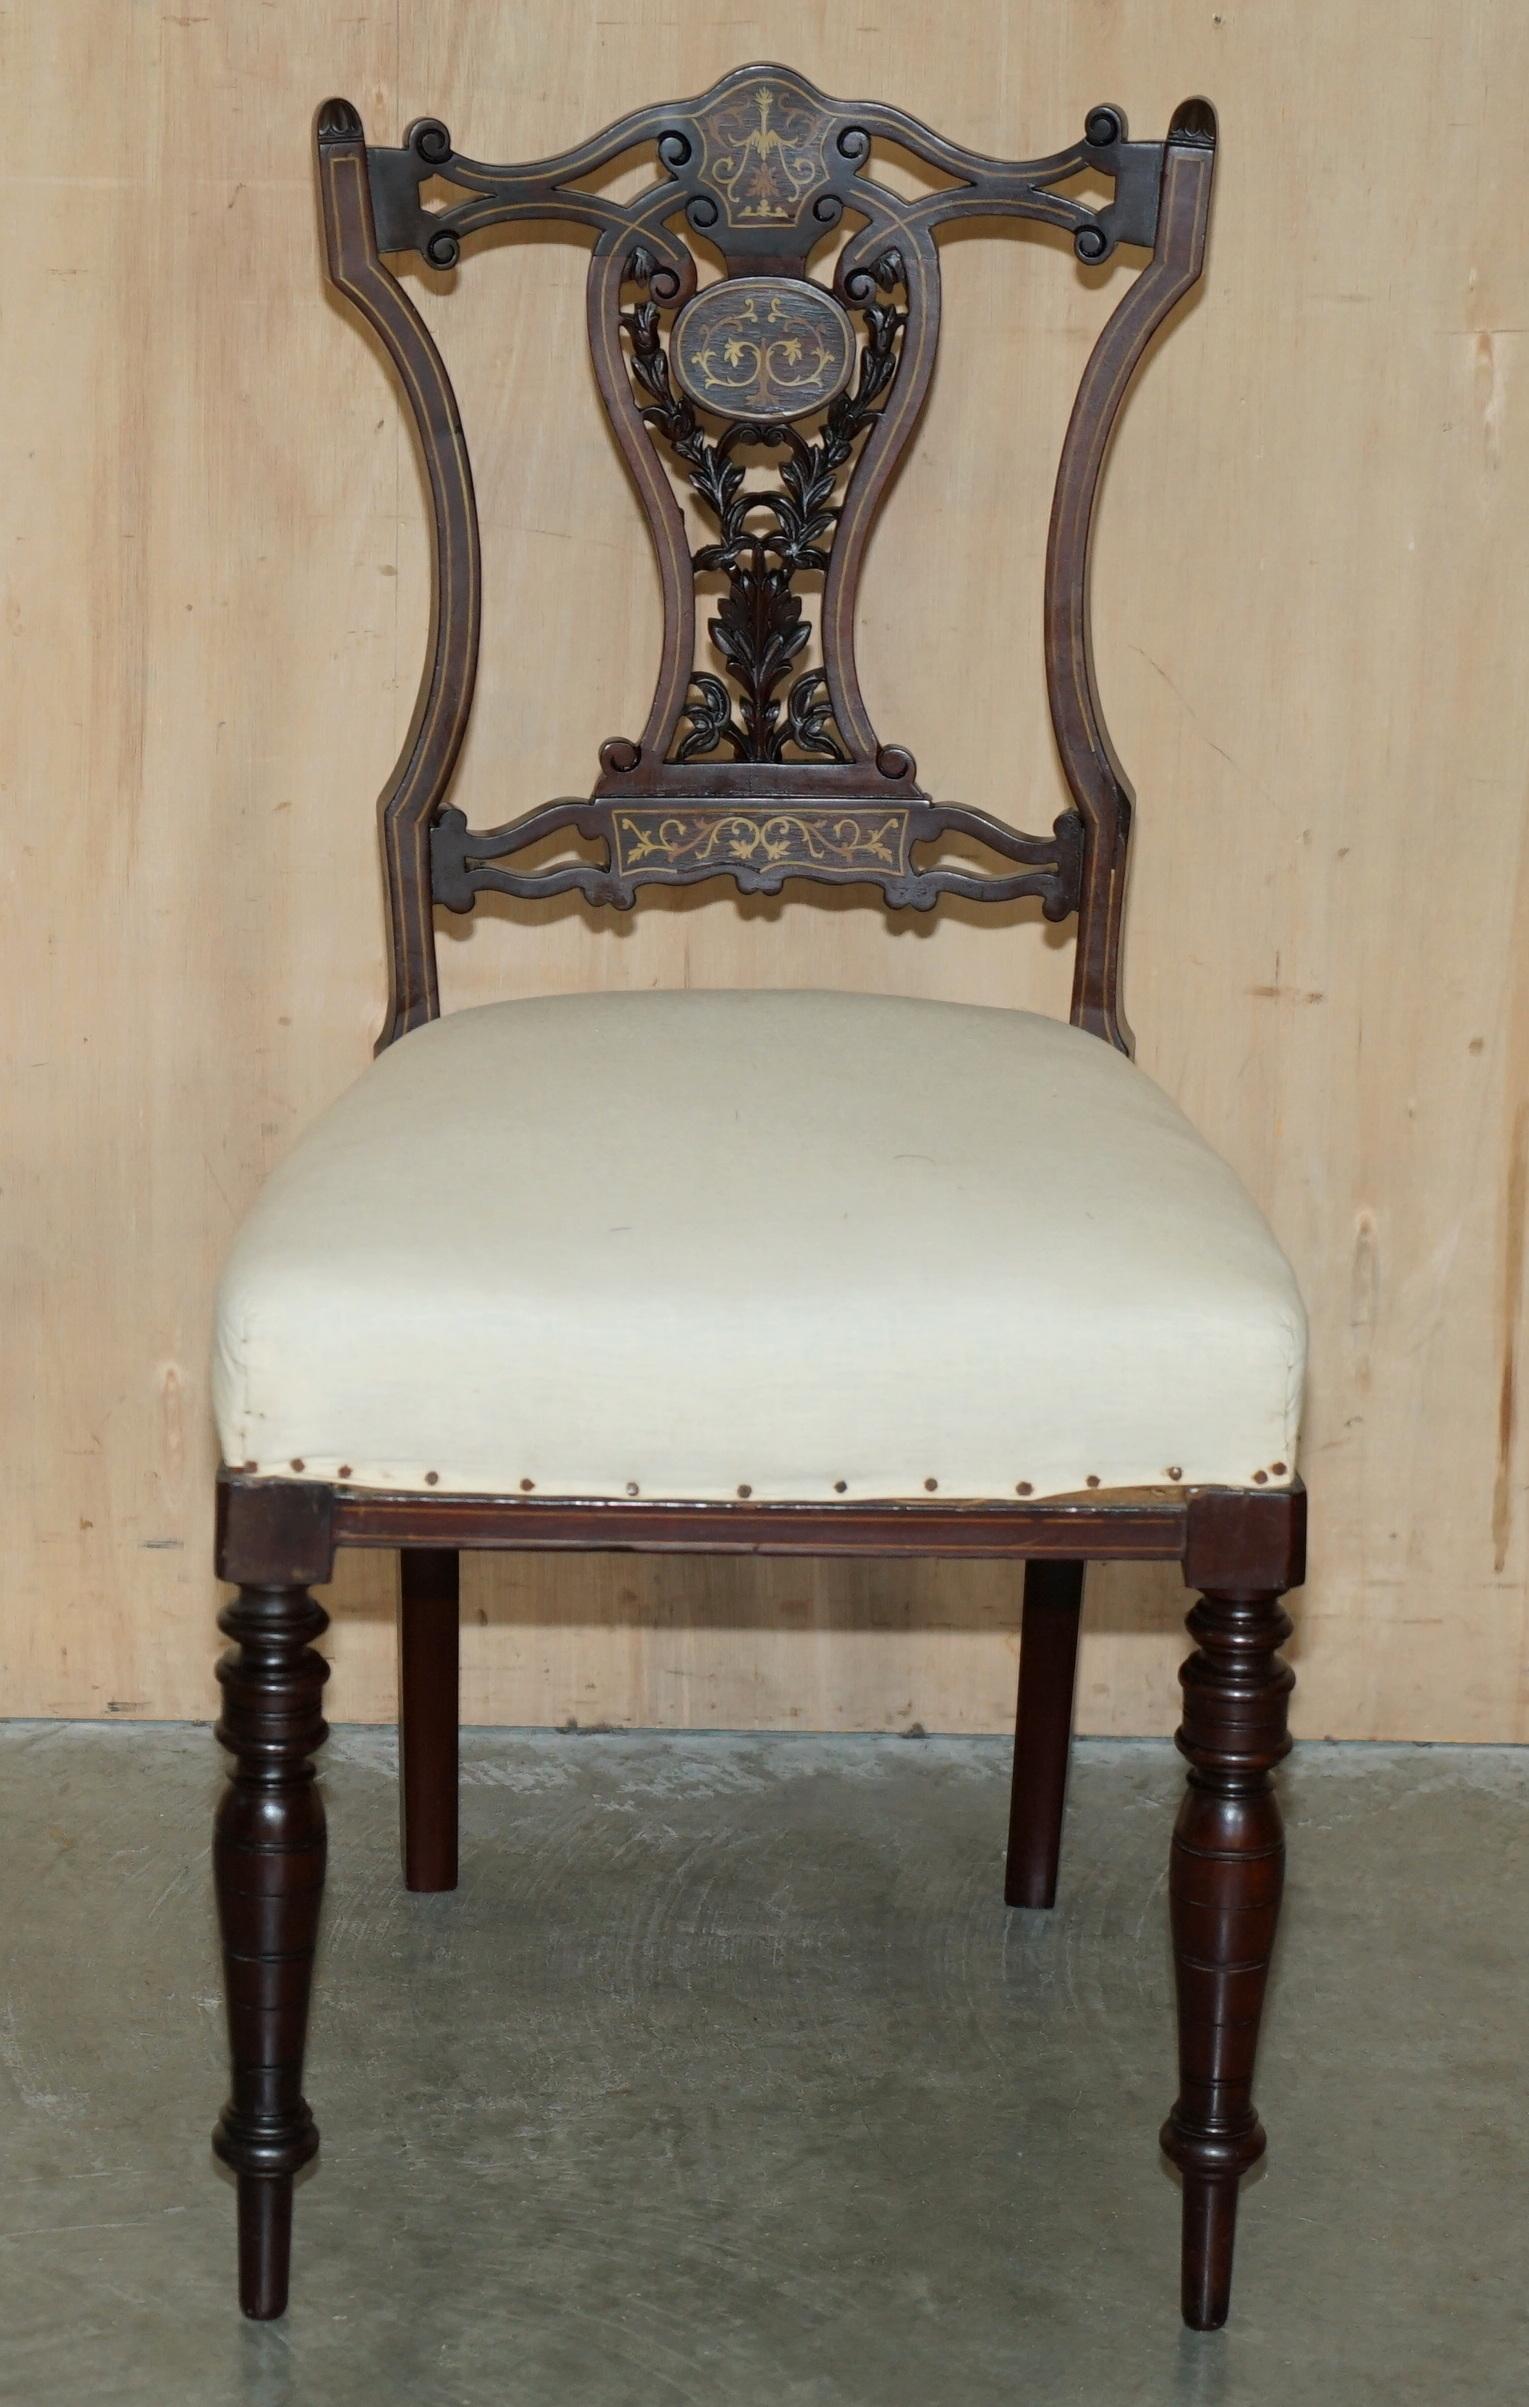 Royal House Antiques

Royal House Antiques is delighted to offer for sale this stunning Antique Victorian Salon chair with ornately hand carved Rosewood frame and Satinwood & Walnut inlay 

Please note the delivery fee listed is just a guide, it